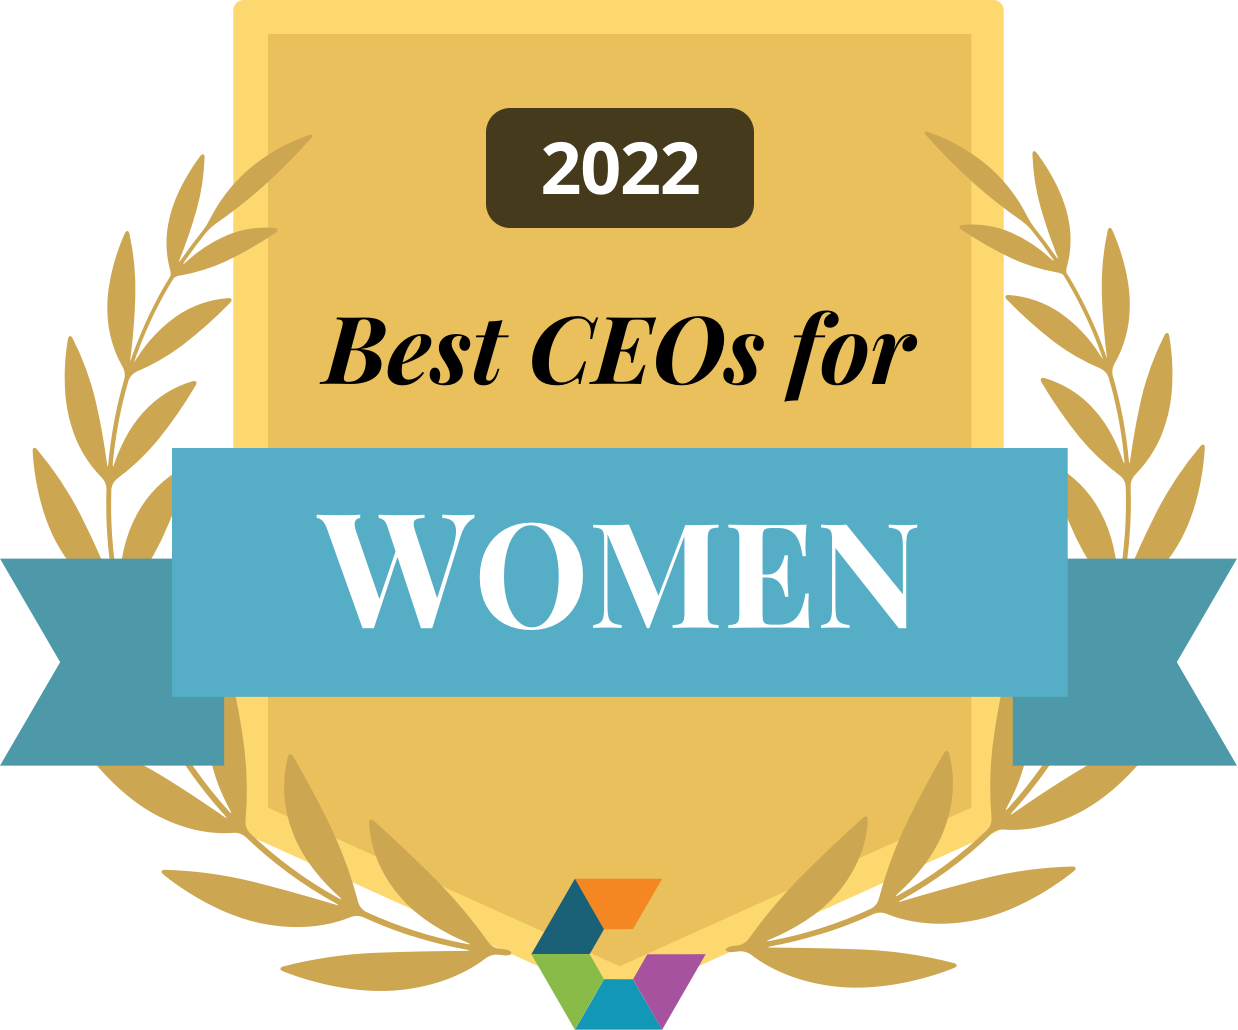 best-ceo-for-women-2022-large